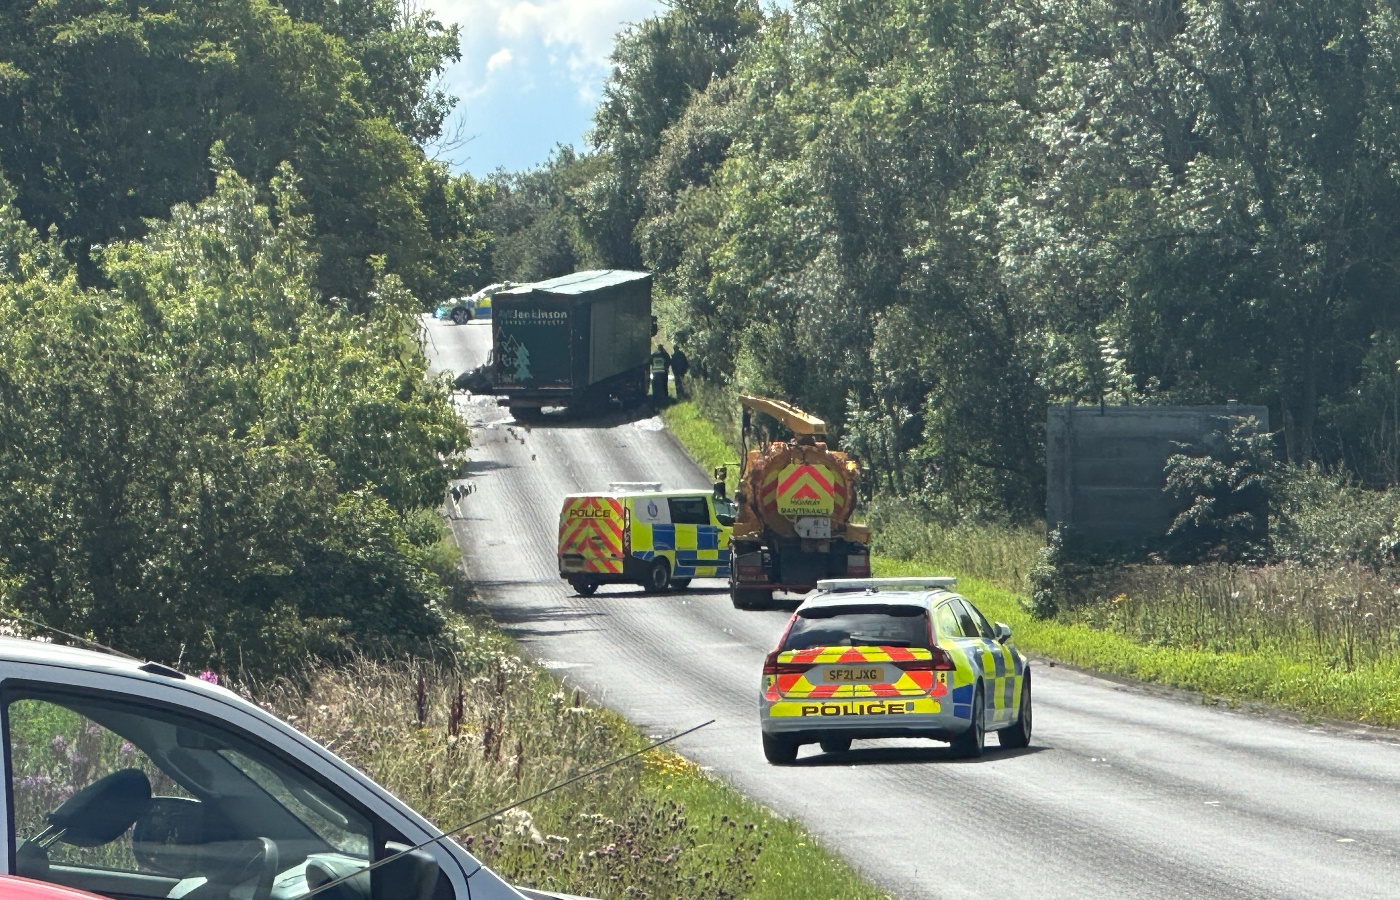 The road was closed for several hours after the incident. 